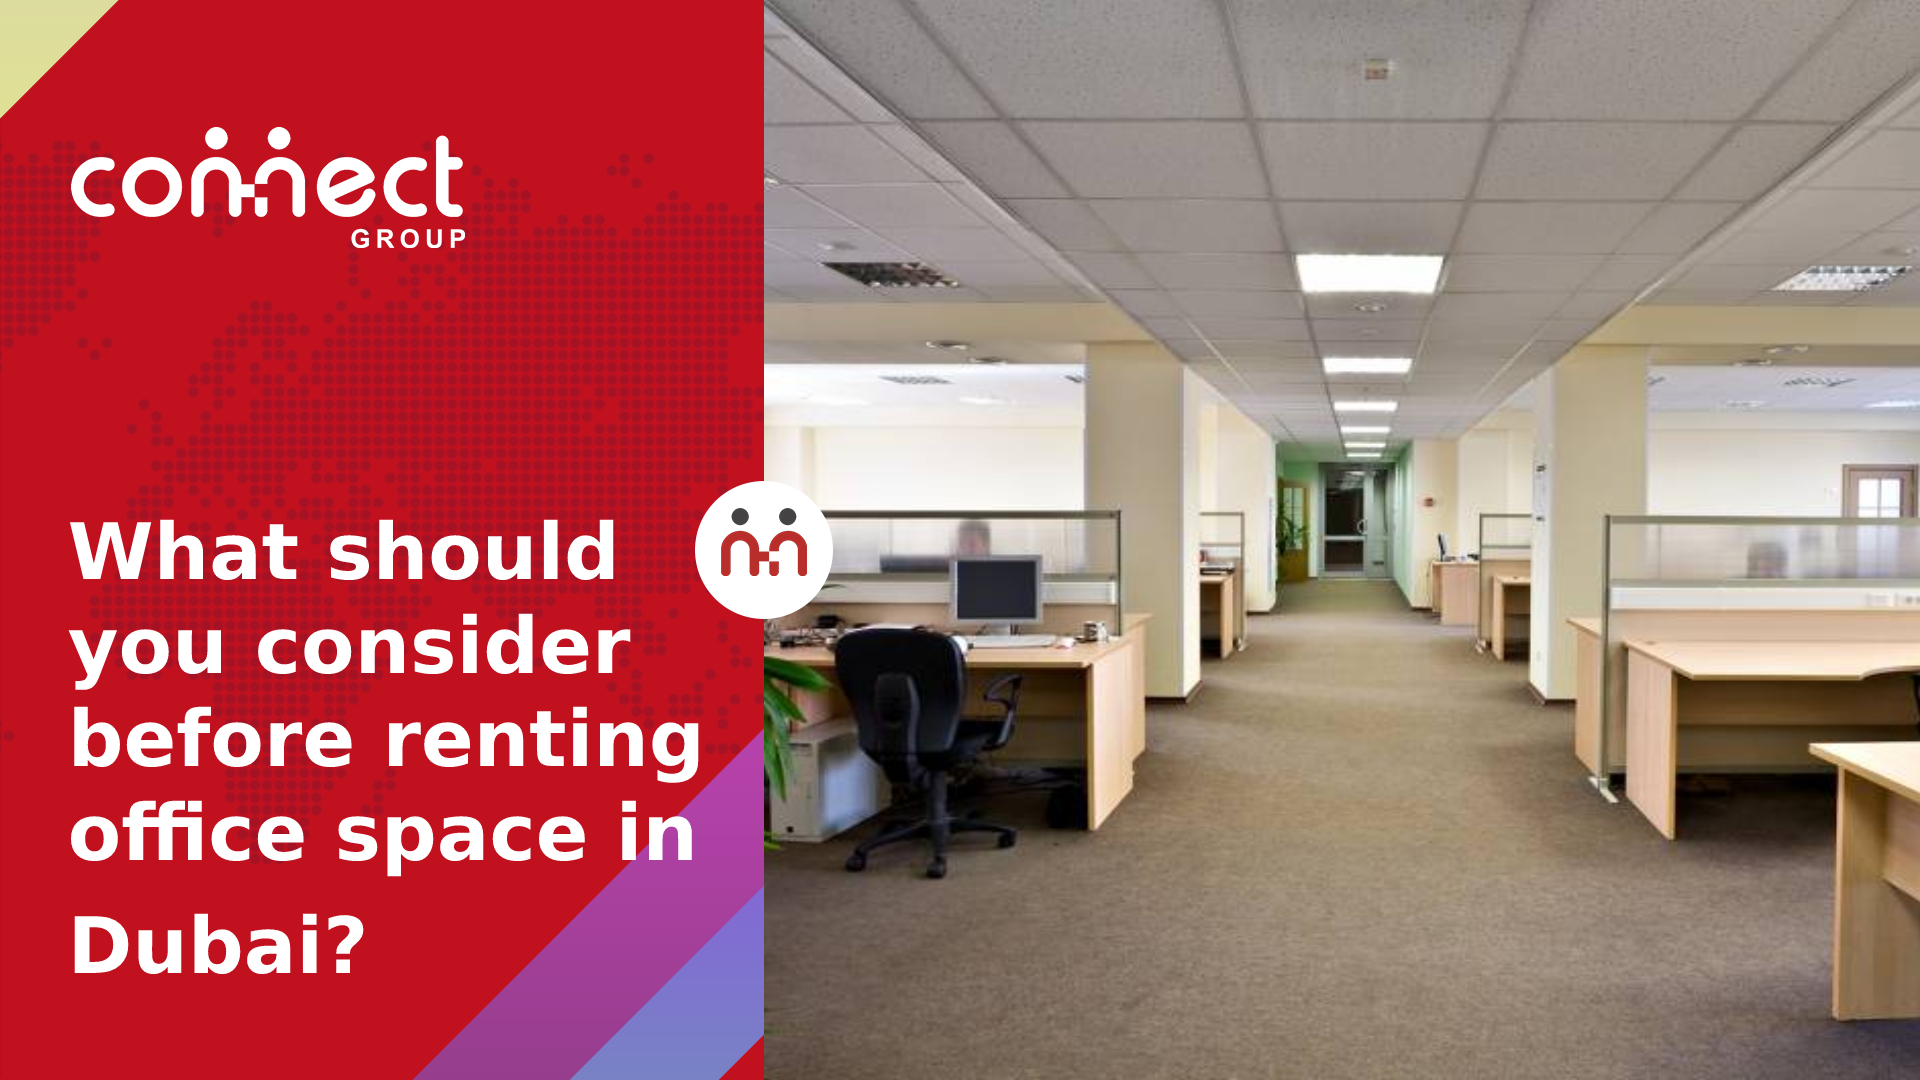 What should you consider before renting office space in Dubai?